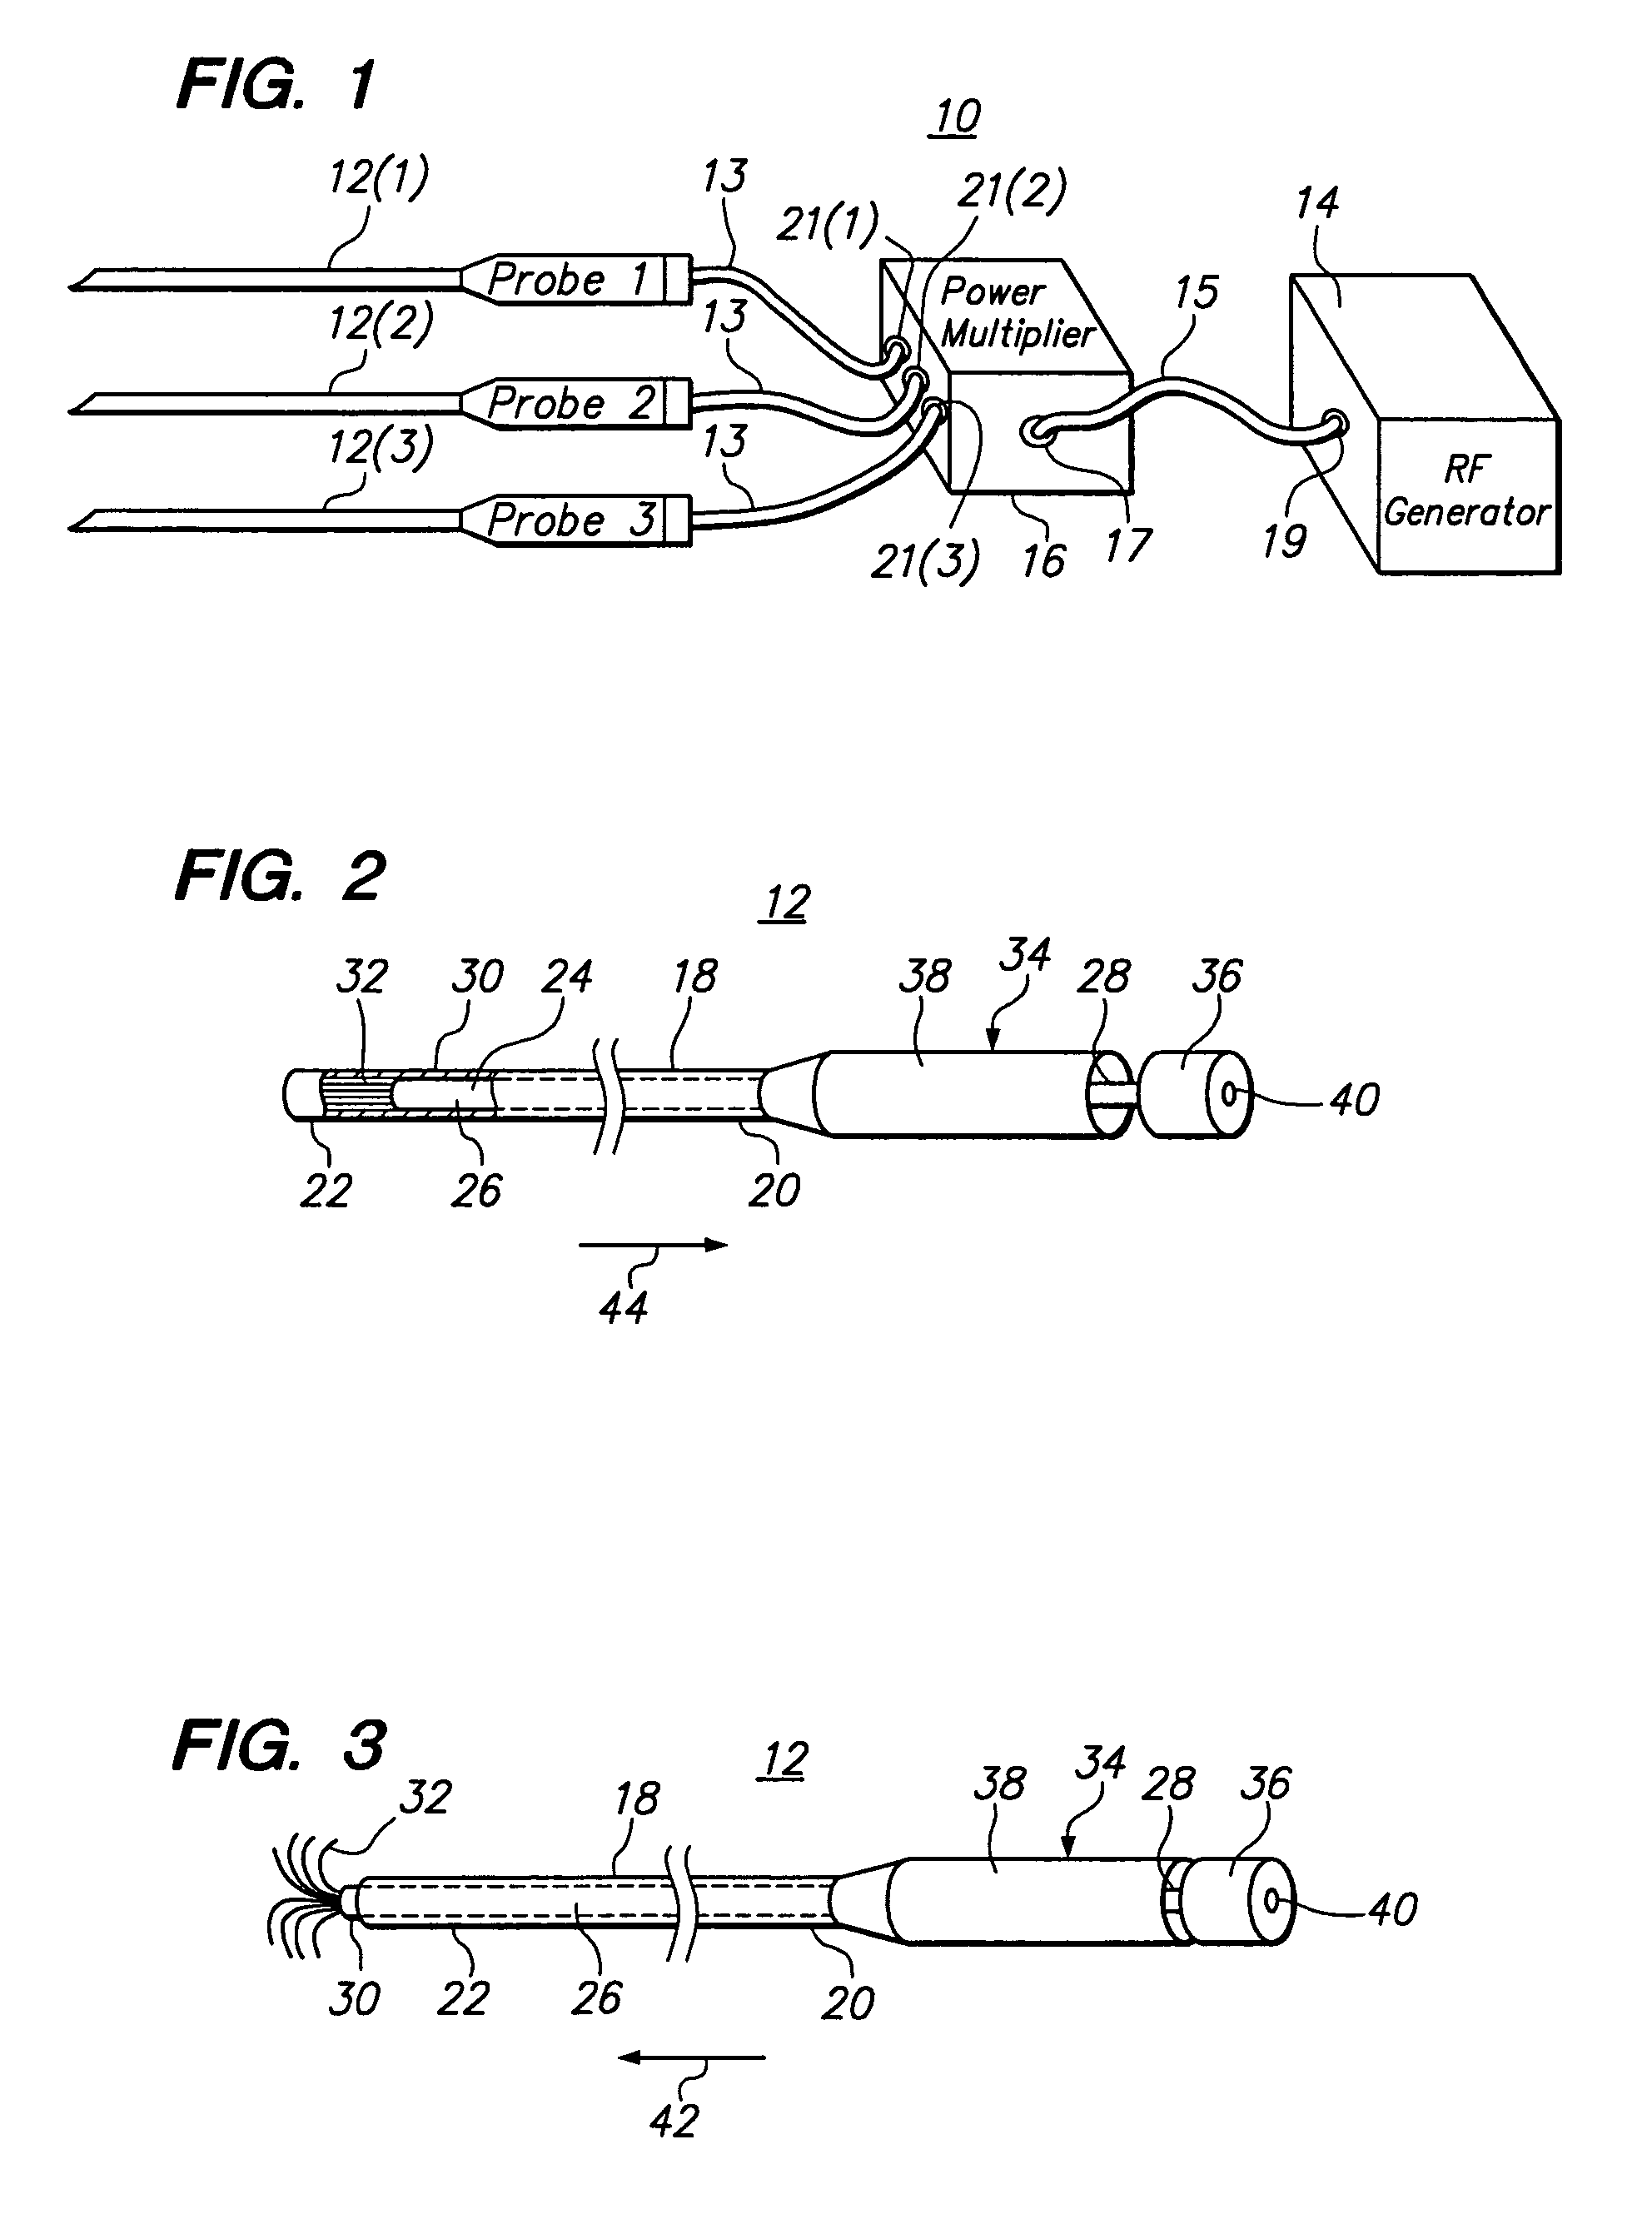 Apparatus for switching nominal and attenuated power between ablation probes